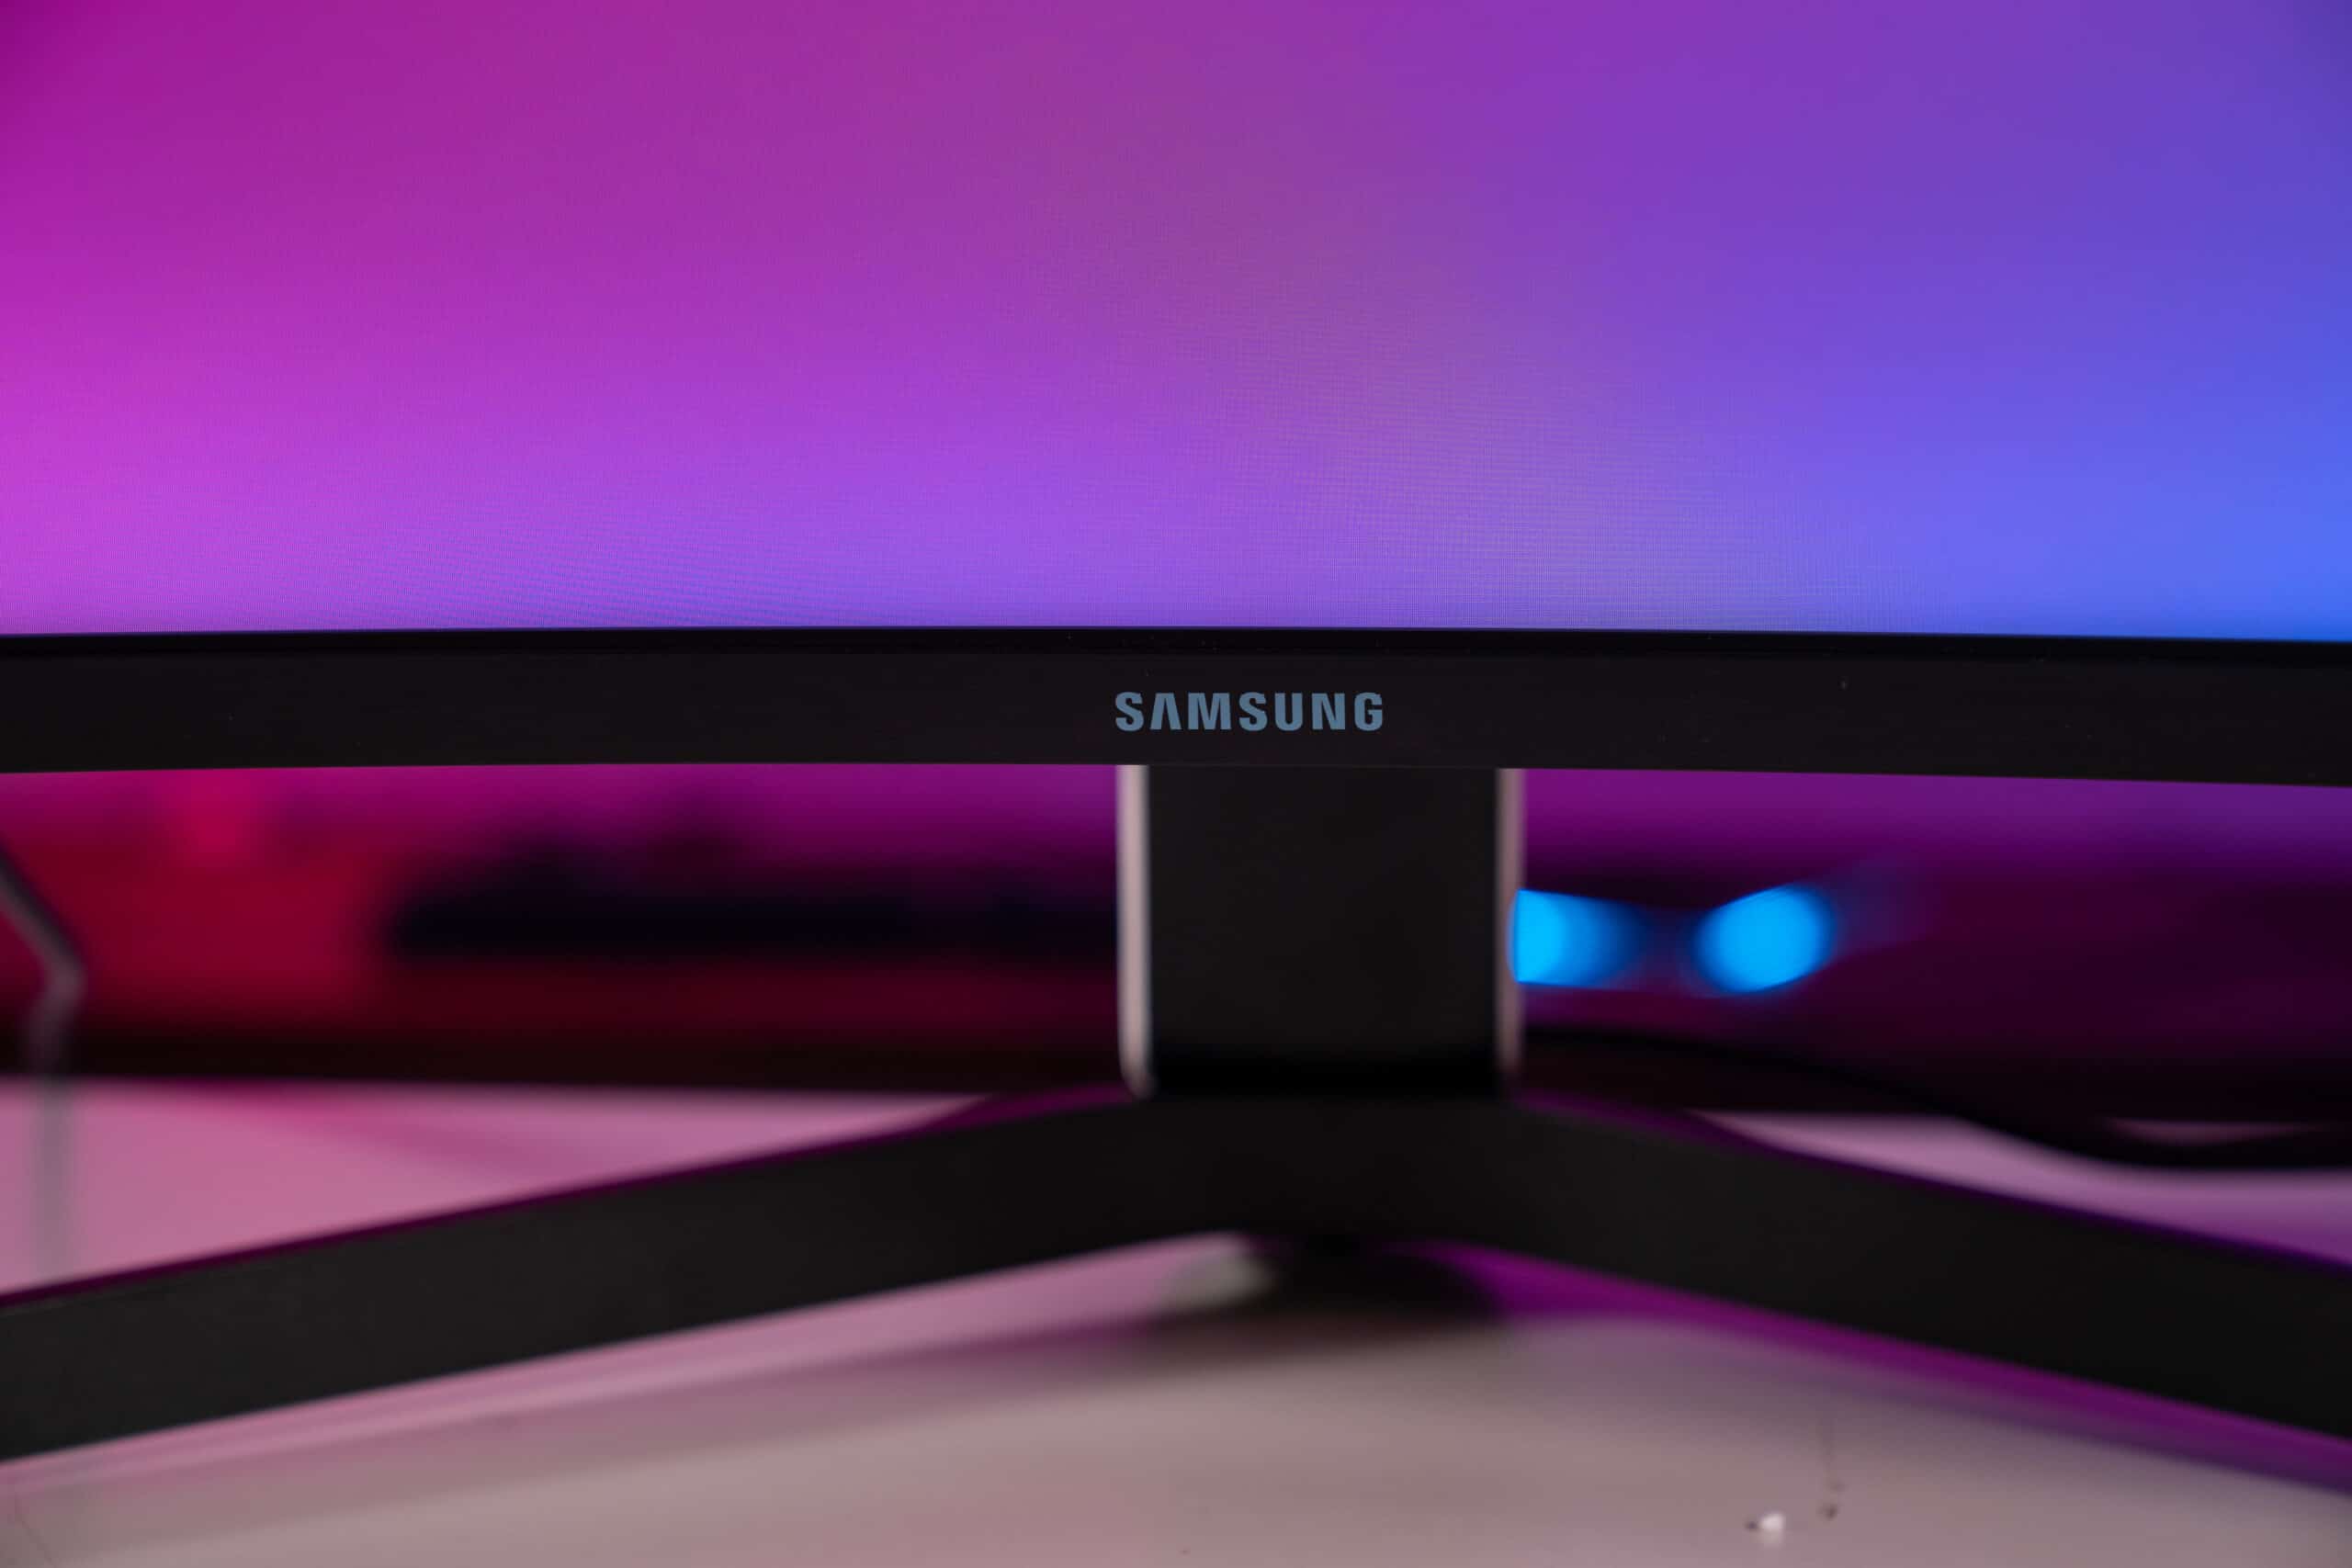 Samsung Odyssey OLED G9 review: I want to buy it